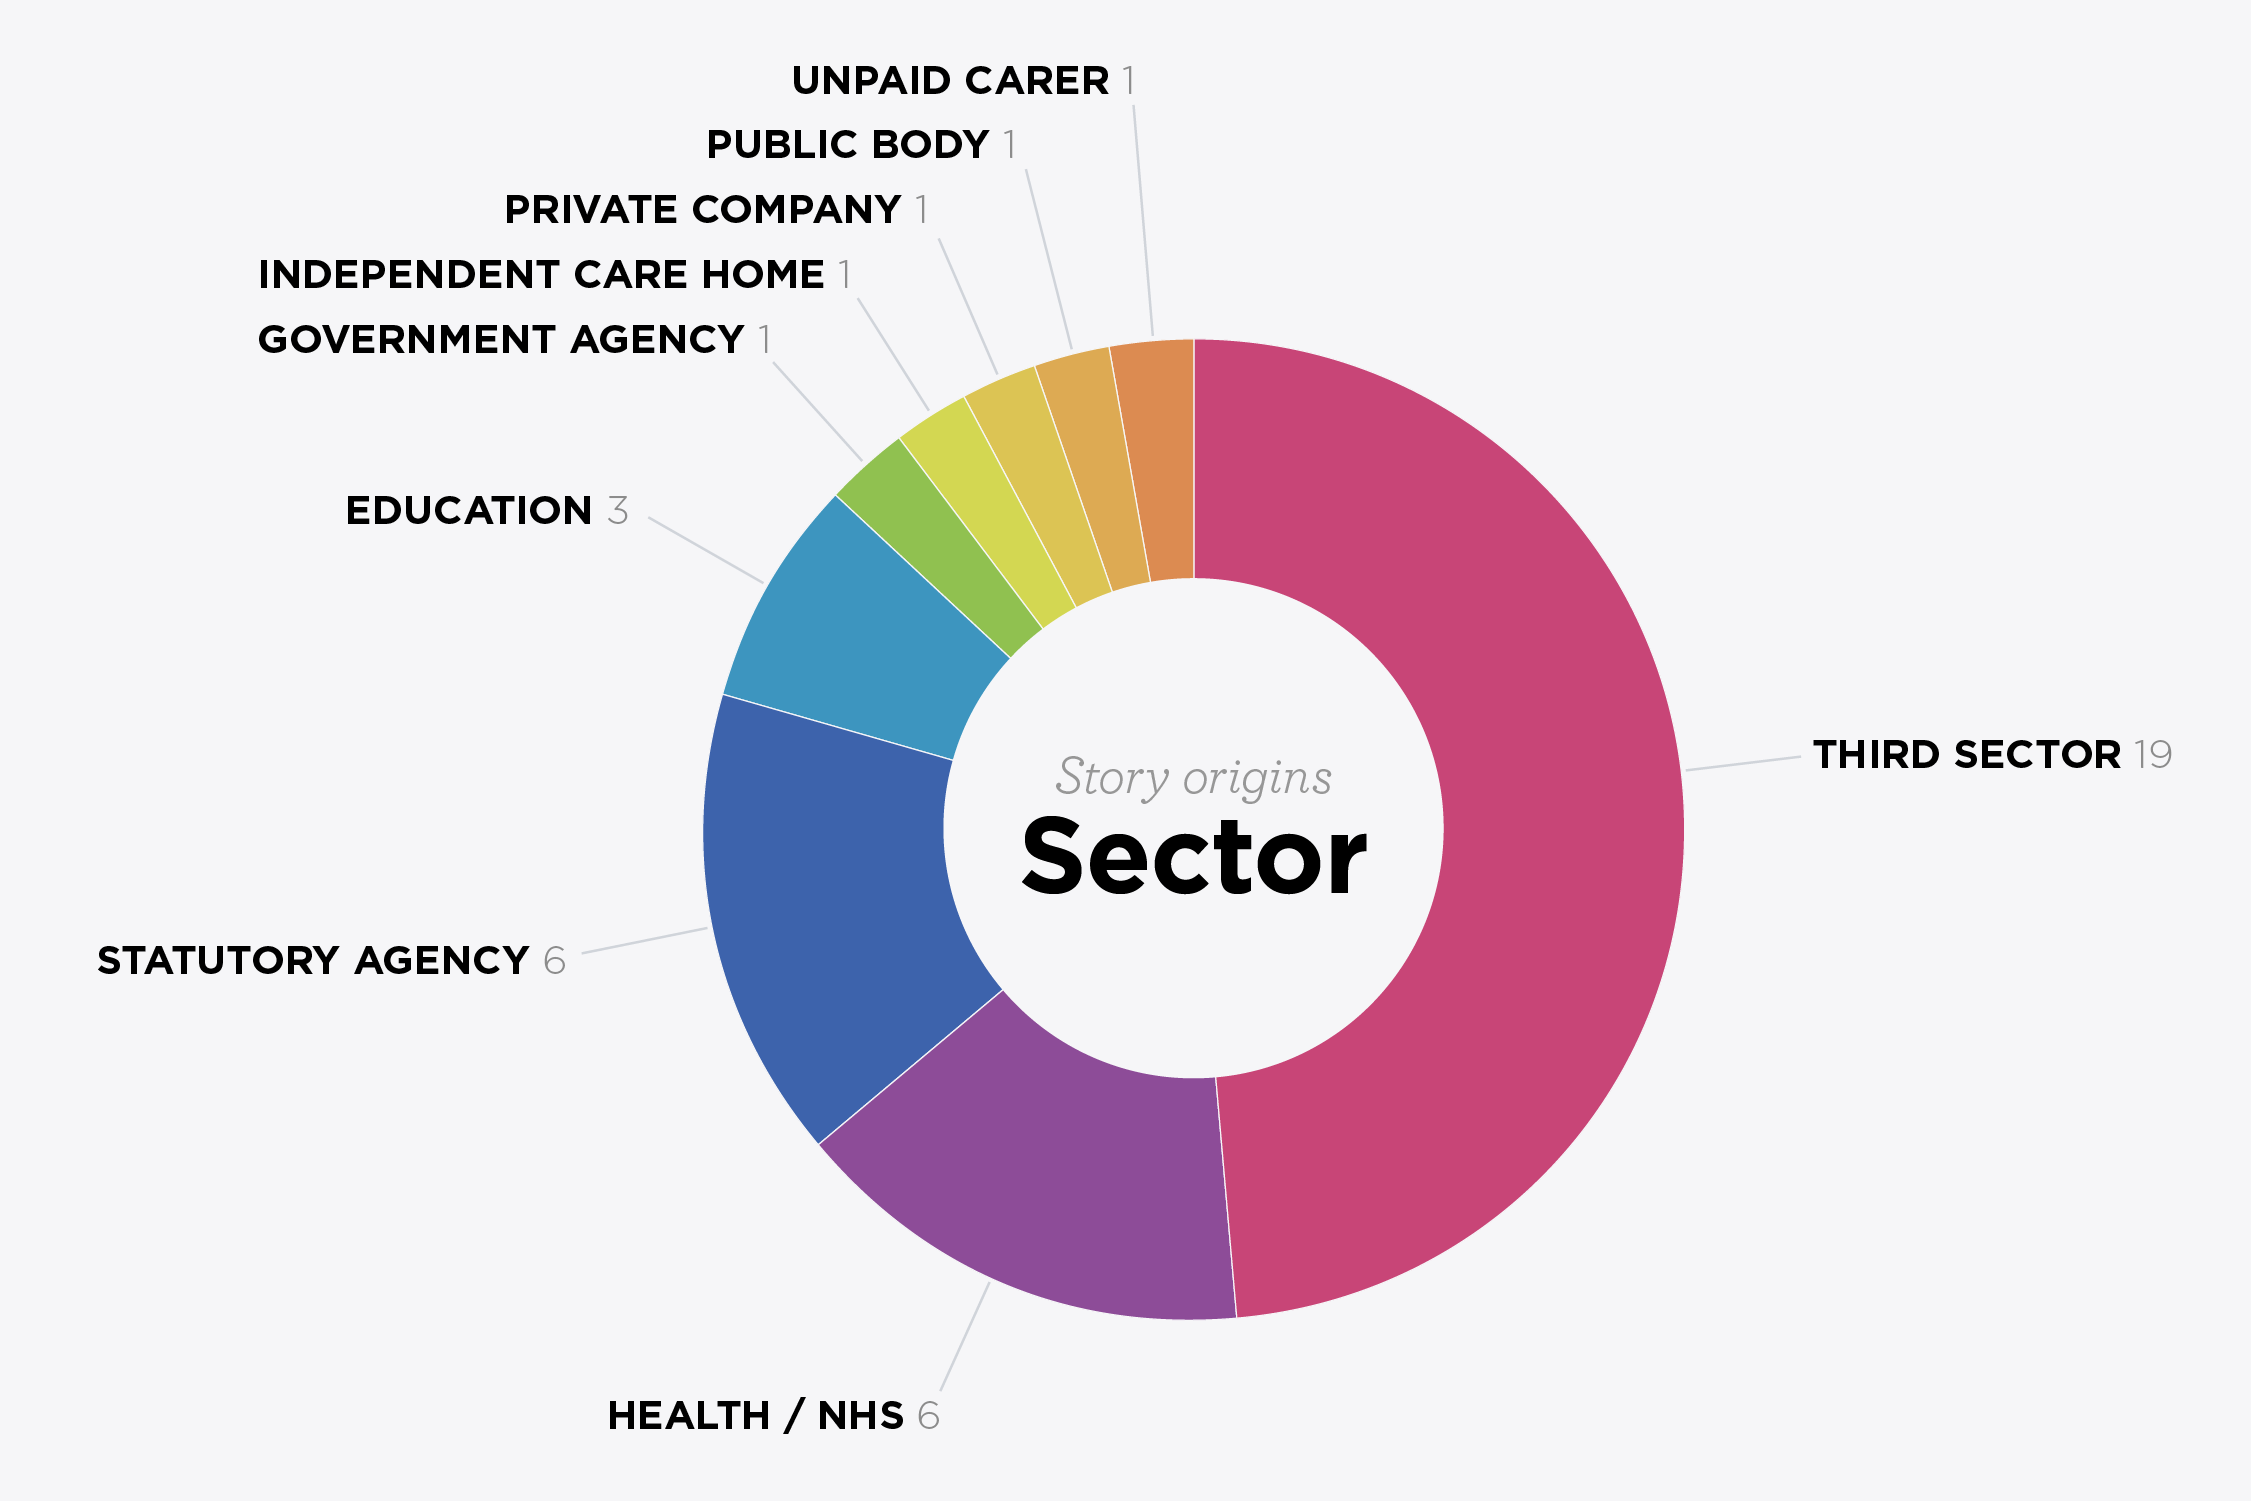 Story origins by sector: Unpaid carer 1,Public body 1,Private company 1,Independent Care Home 1,Government agency 1,Education 3,Statutory agency 6,Health / NHS 6,Third sector 19